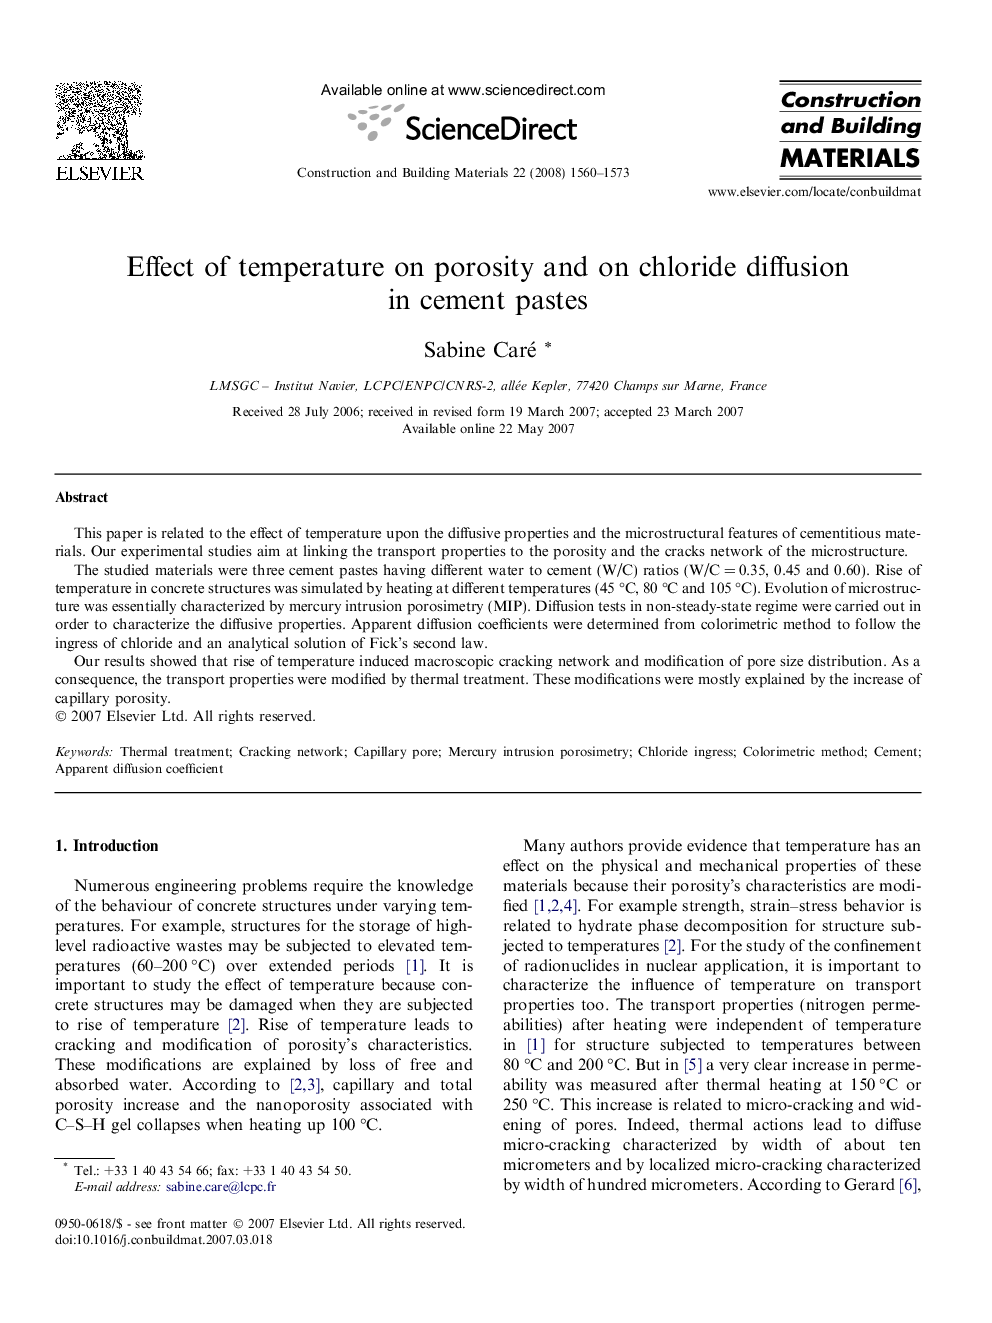 Effect of temperature on porosity and on chloride diffusion in cement pastes